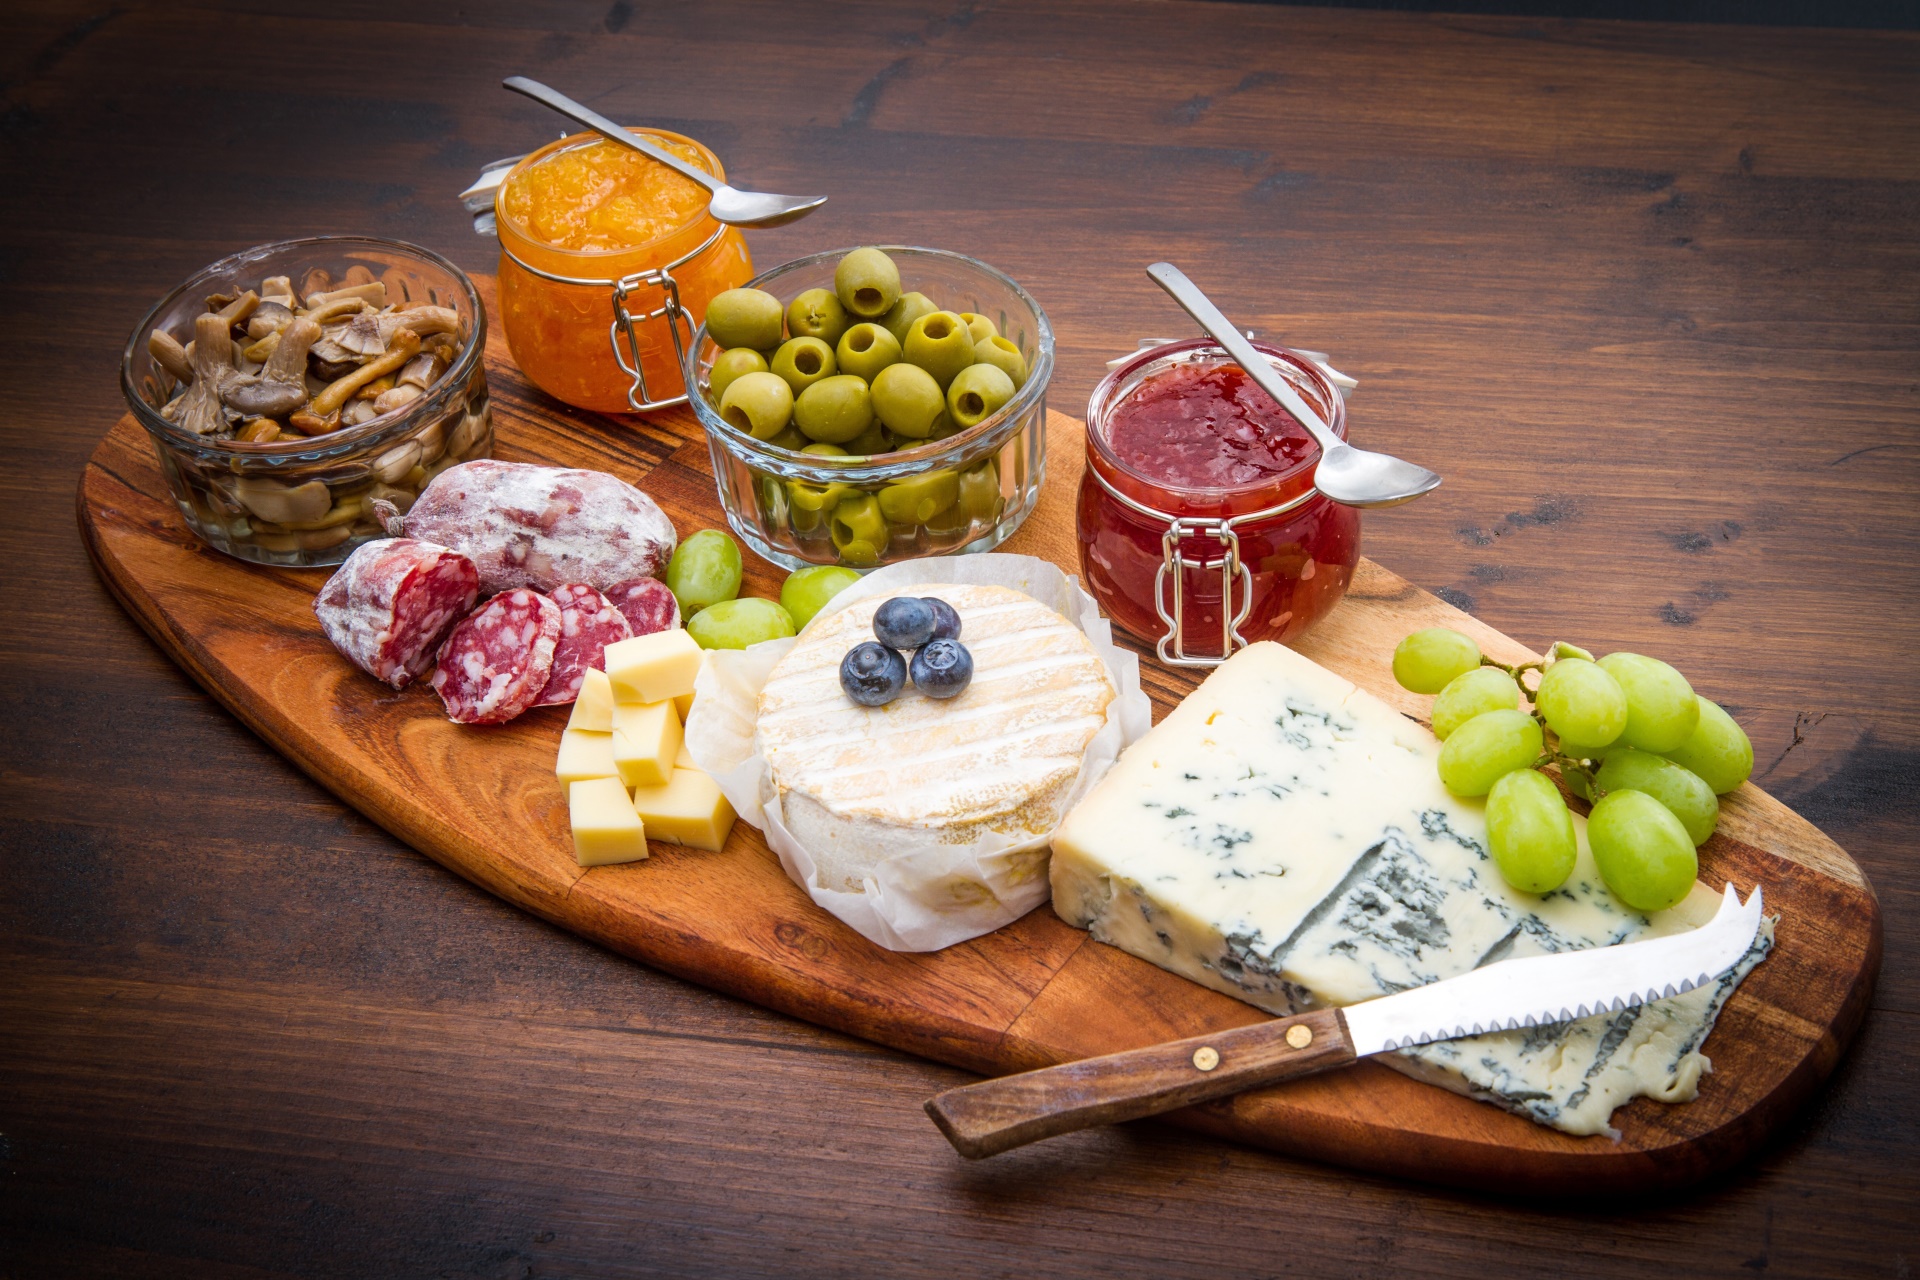 General 1920x1280 still life food blueberries cheese grapes olives mushroom cutting board Jam wooden surface